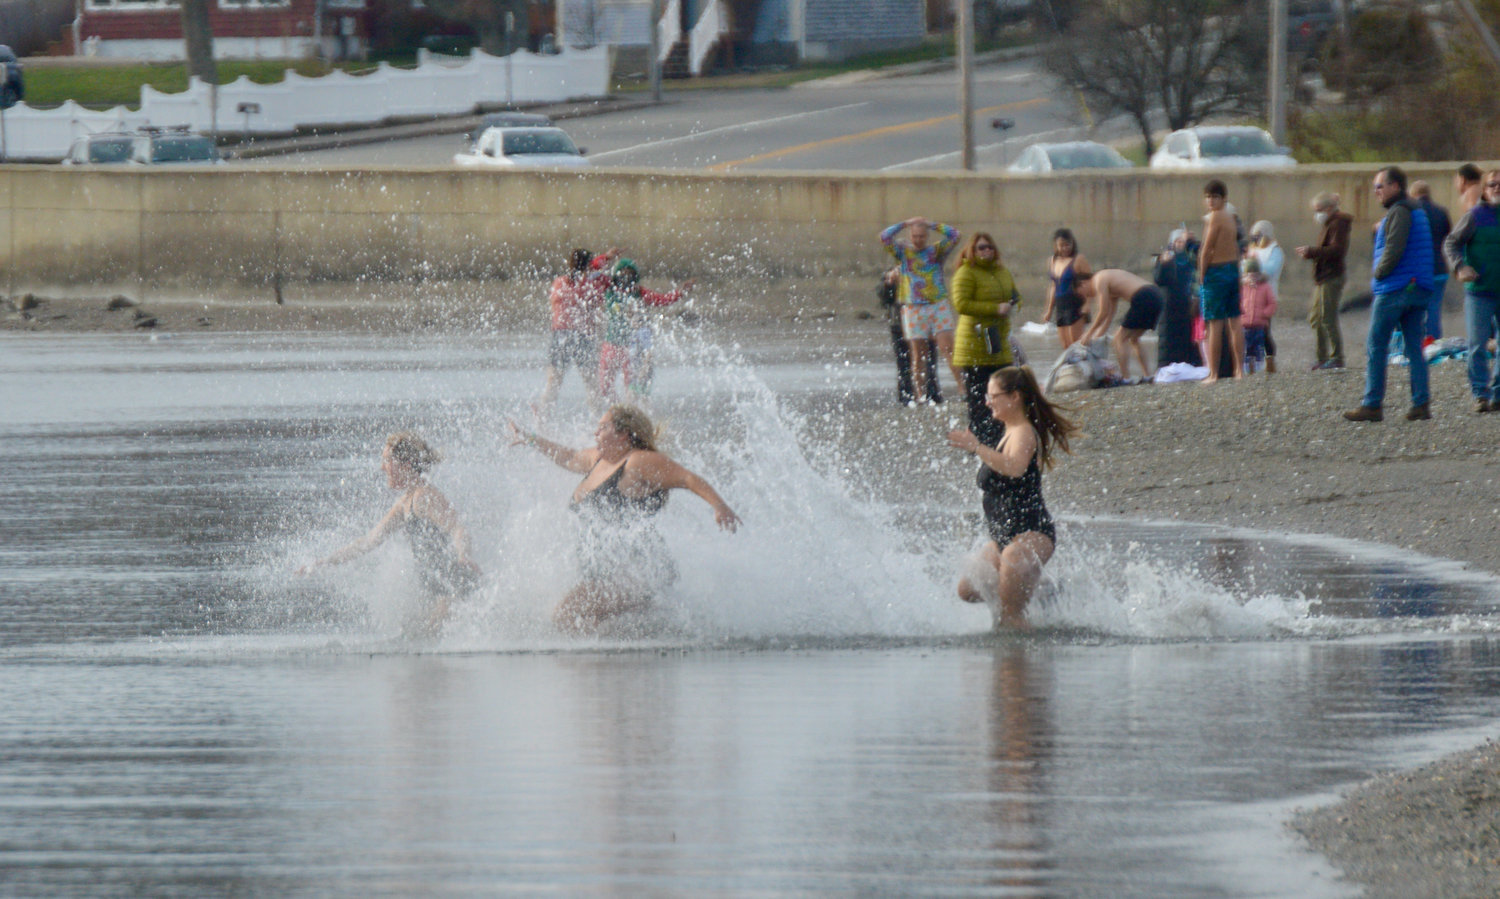 Emma Harvey, Brooke Saunders and Christina Halliday (from left) splash in the waters at Island Park Beach as they take a New Year’s Day dip on Jan. 1, 2021. Although there was no “official” New Year’s Day dive that day, several people jumped in anyway.